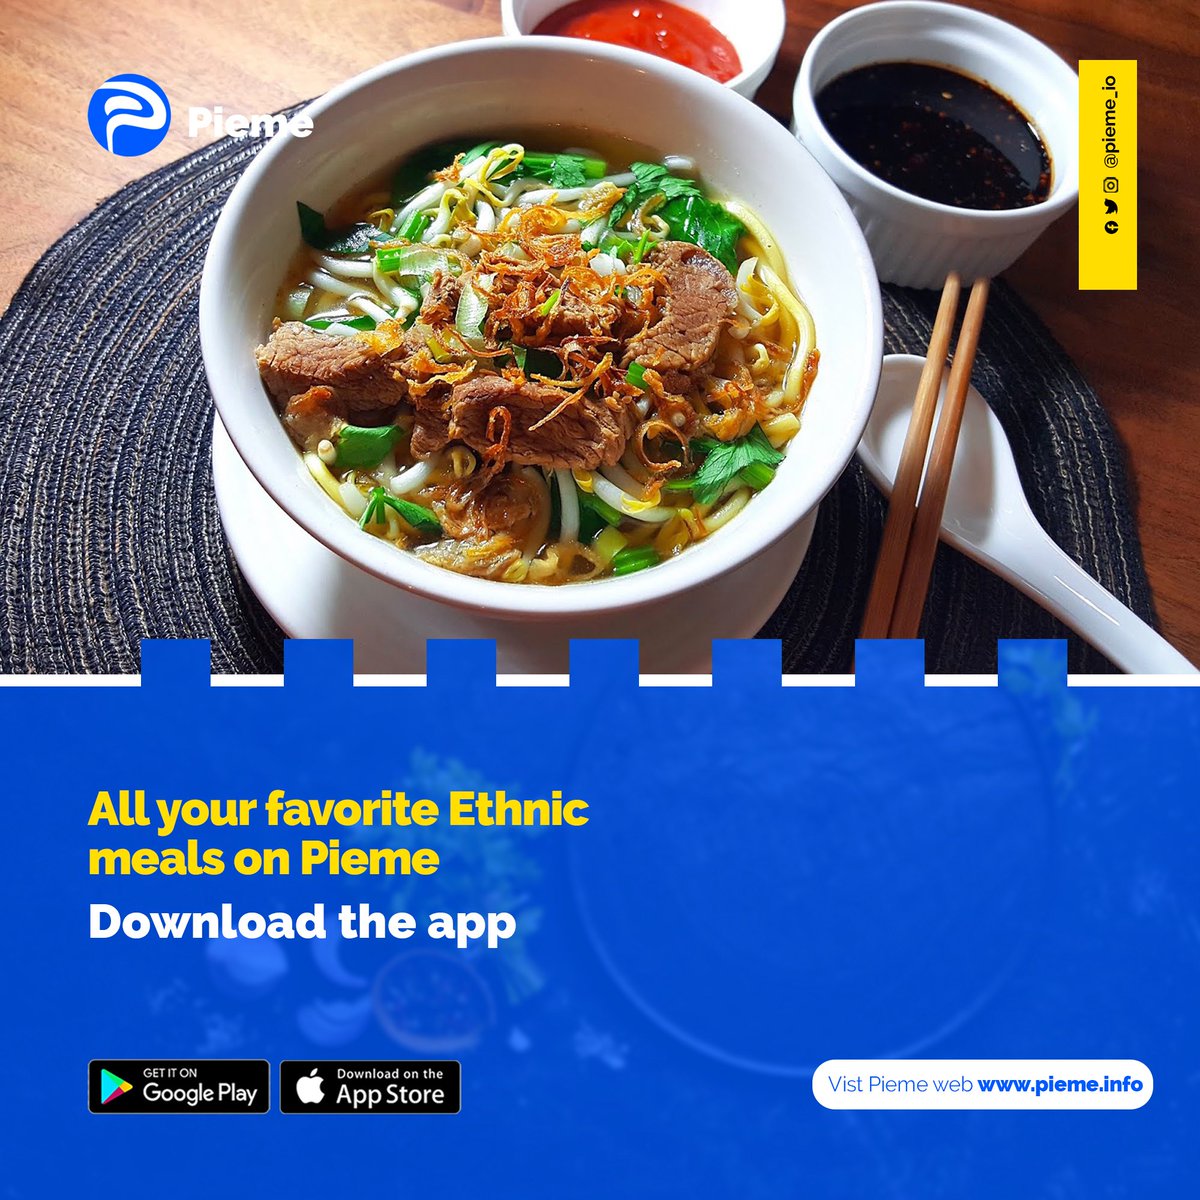 Small reminder; We are still the best plug for authentic local dishes! Do you have a meal you have been craving but can't make? Join the Pieme family and see the meals on offer by hosts! It might be there. >> linktr.ee/pieme_me_